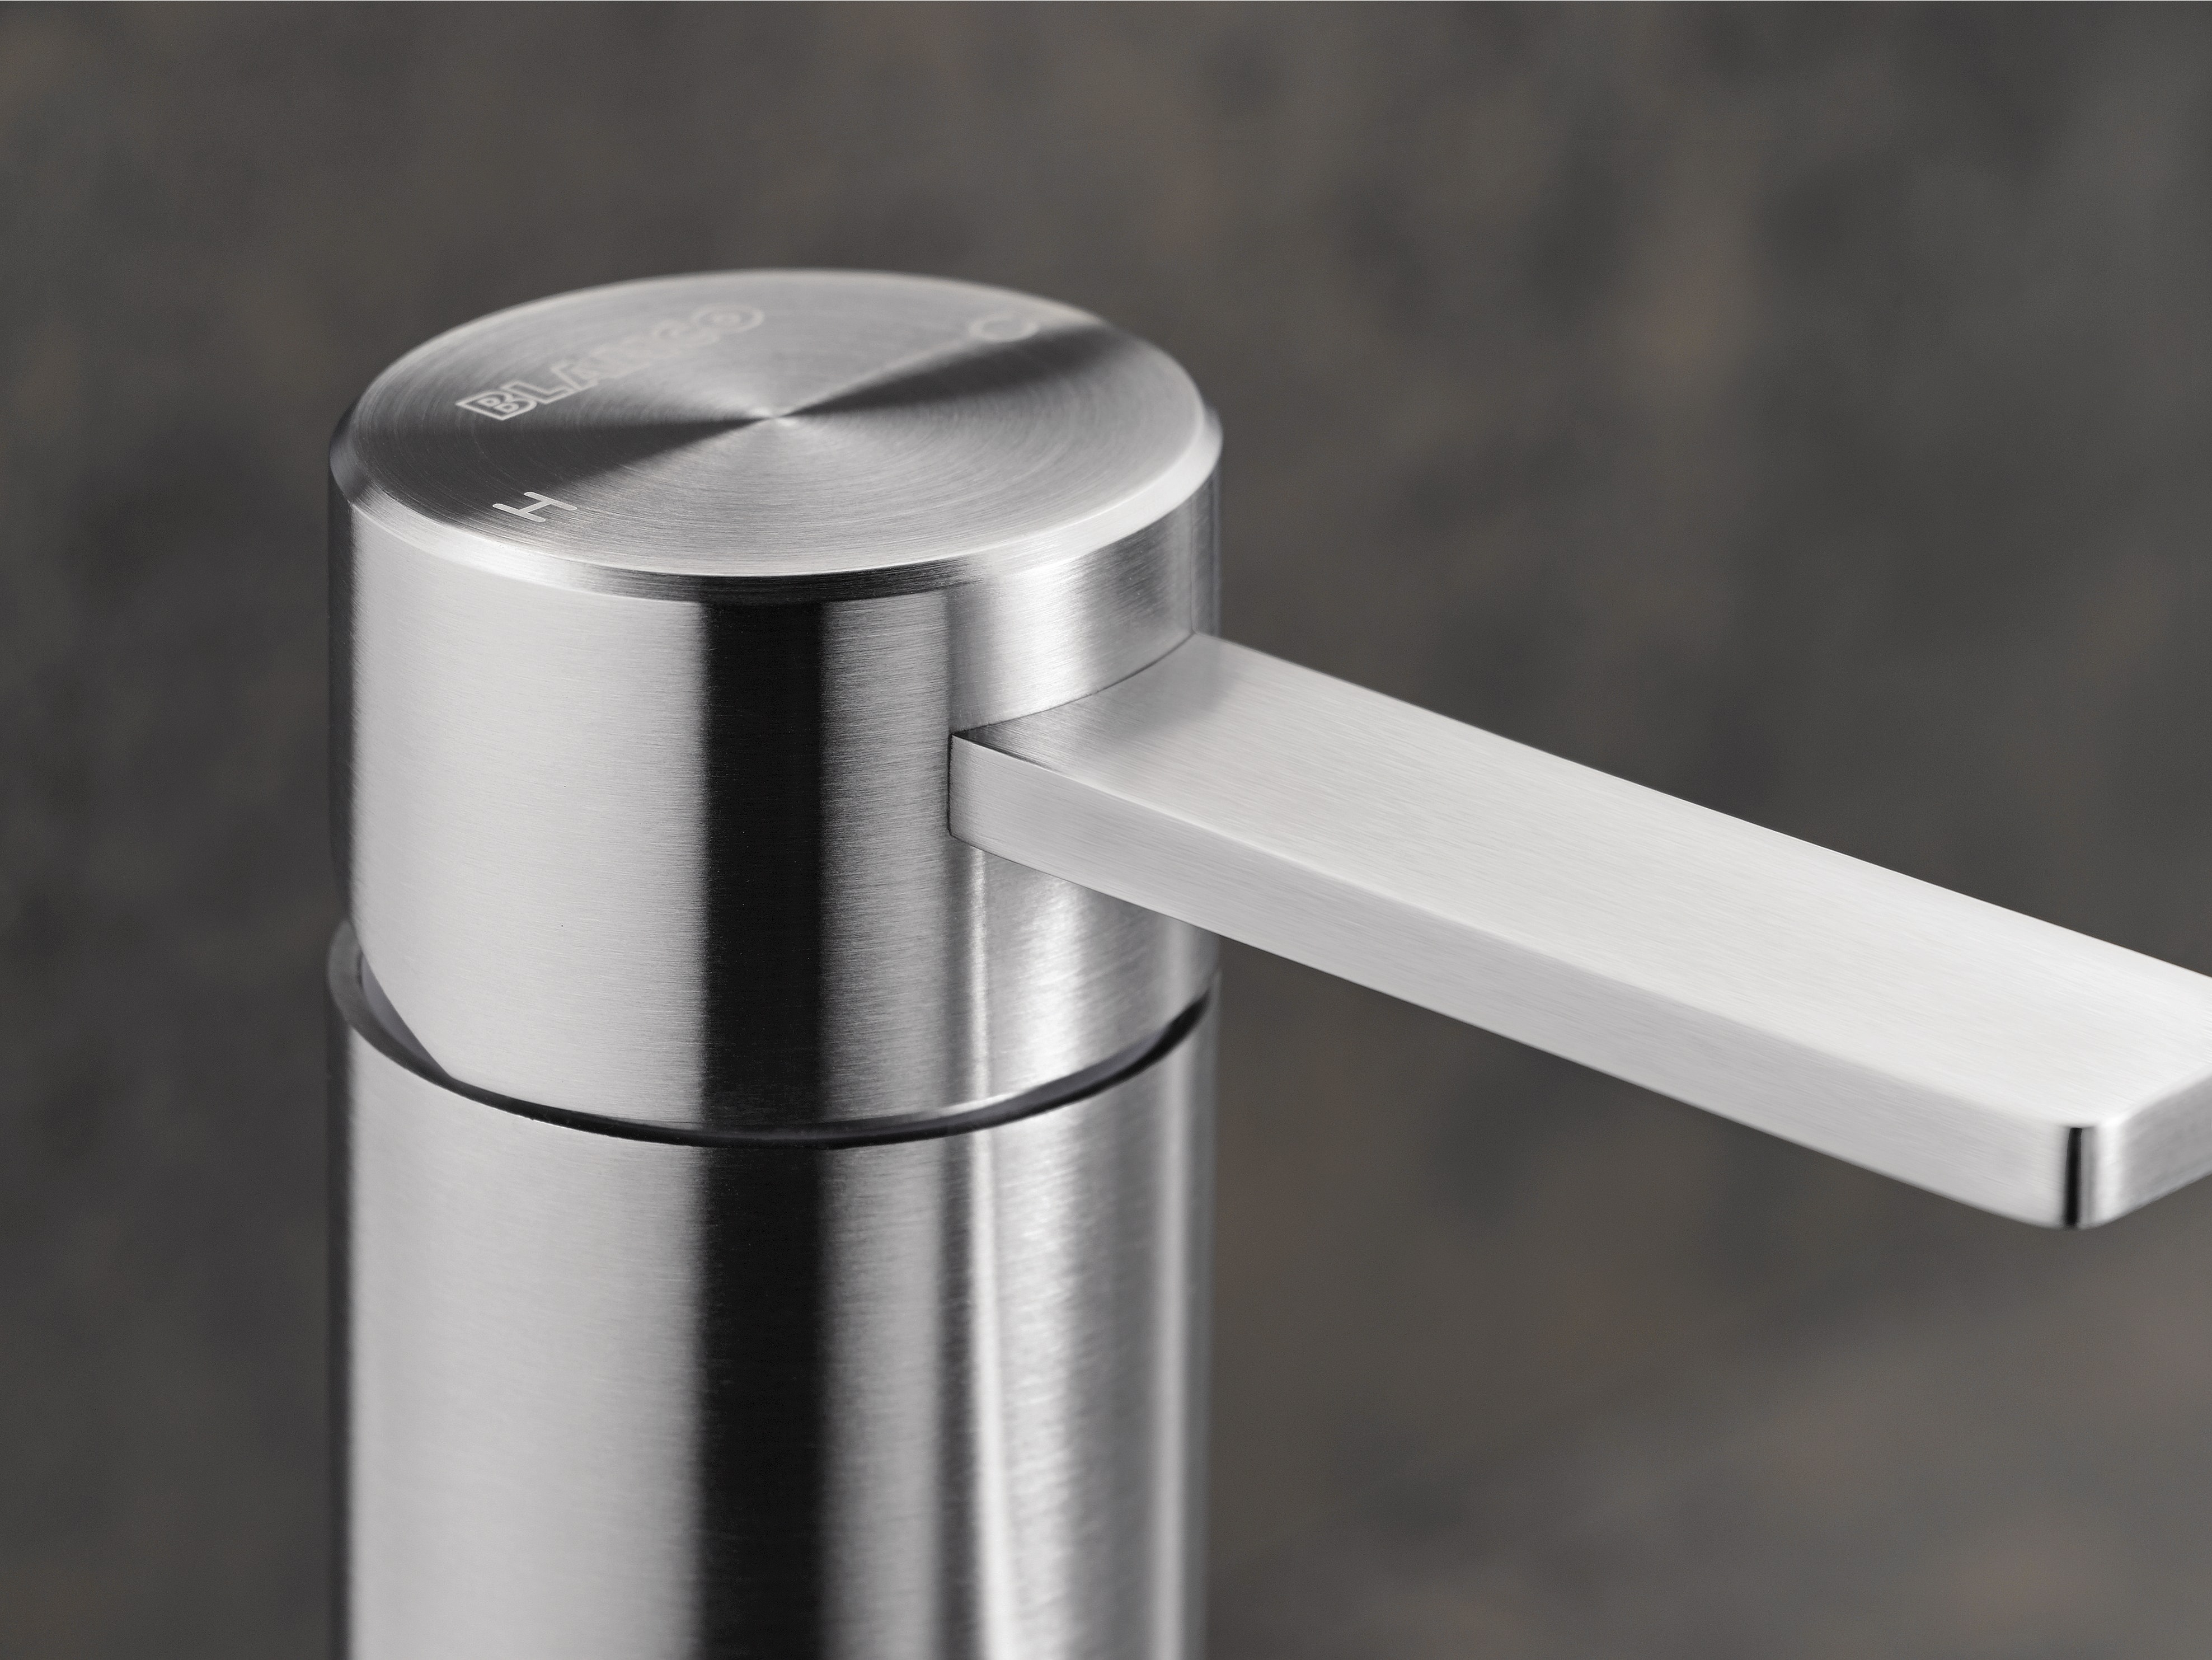 The mixer tap with a mid-height control lever is suitable for both left- and right-handed users.